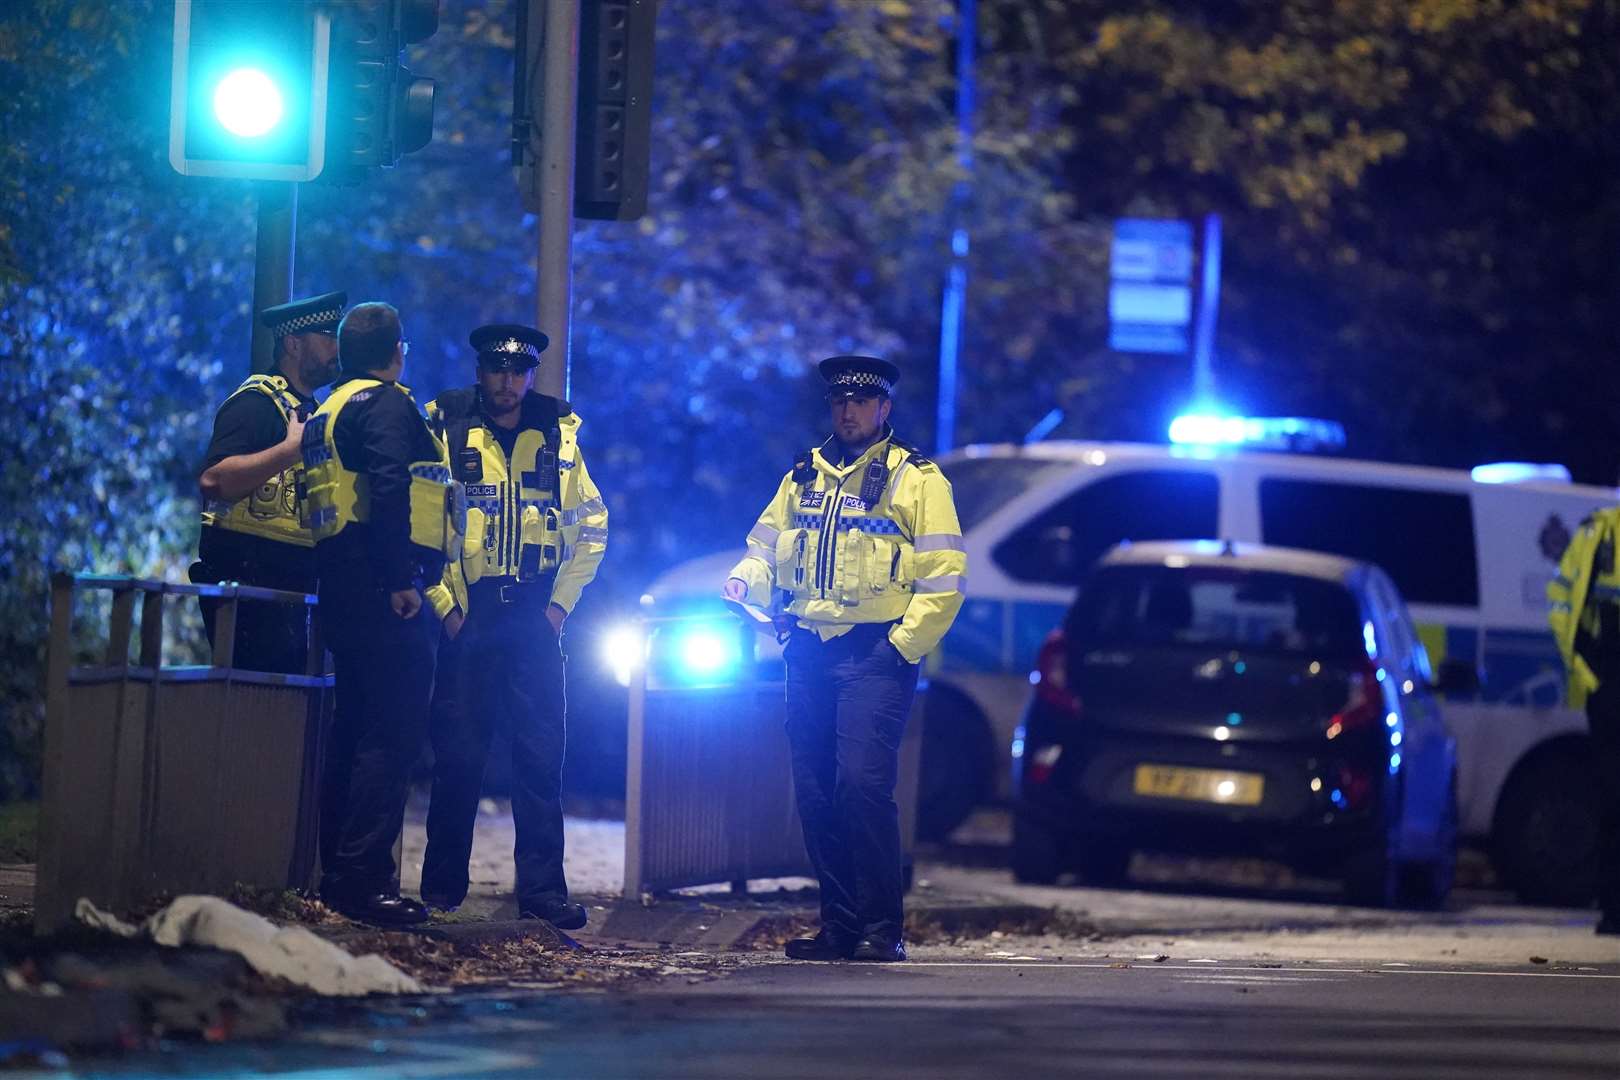 Police activity in Horsforth after the incident (Danny Lawson/PA)